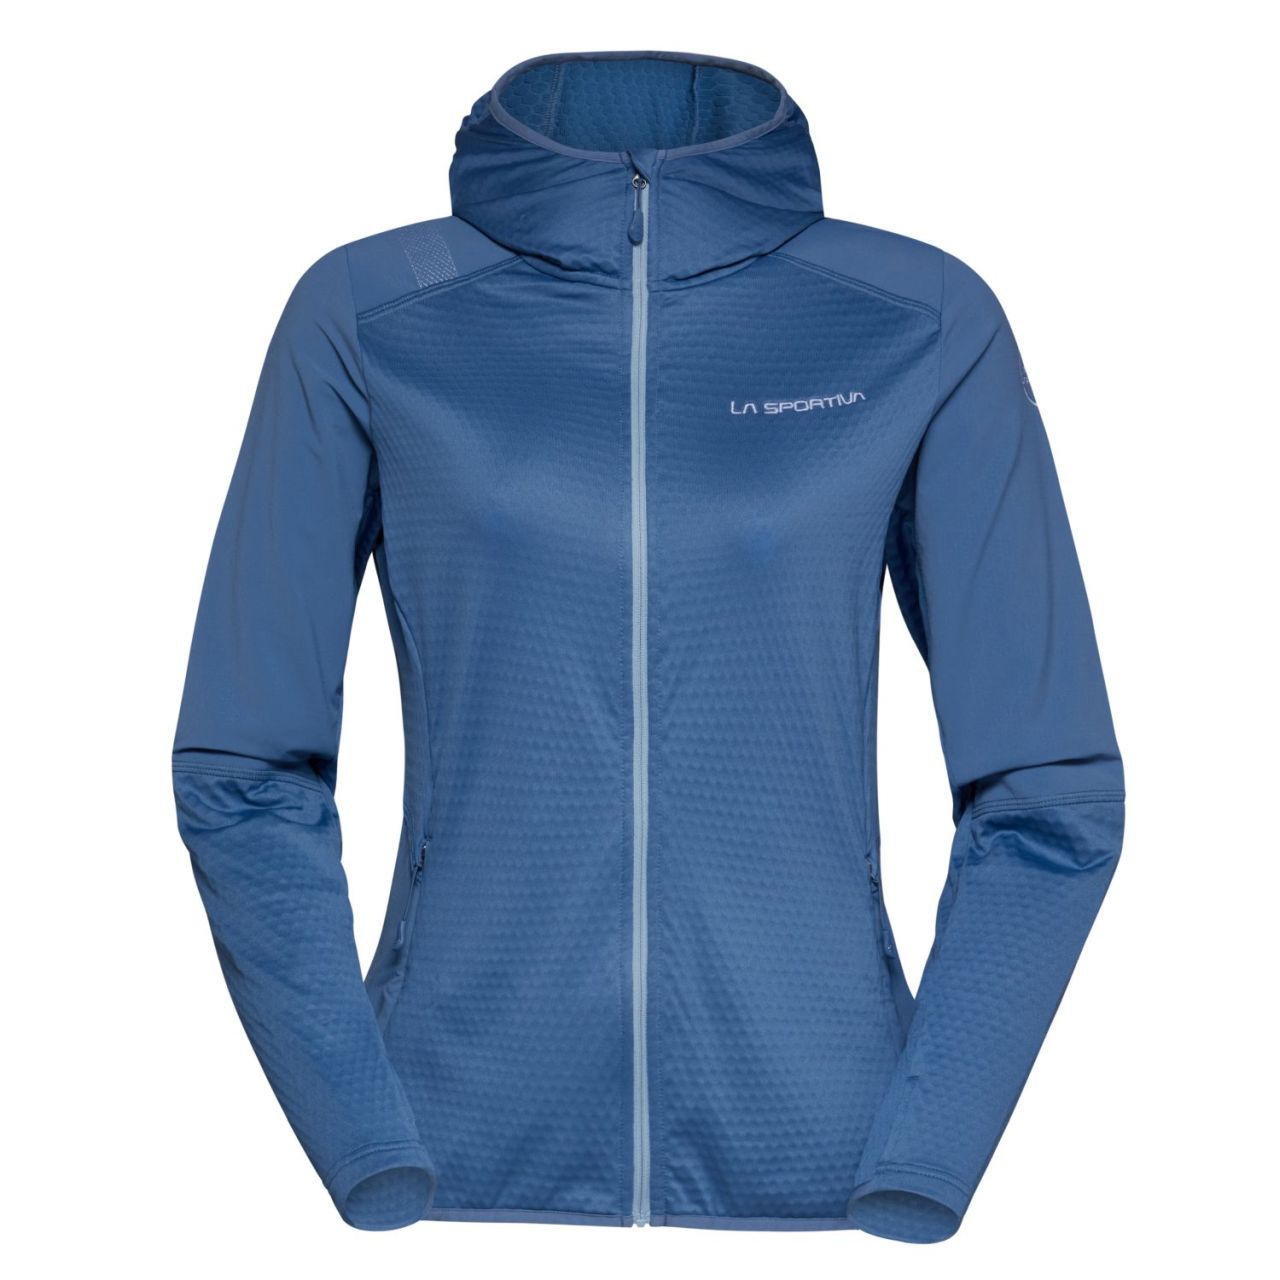 Existence Hoody Woman